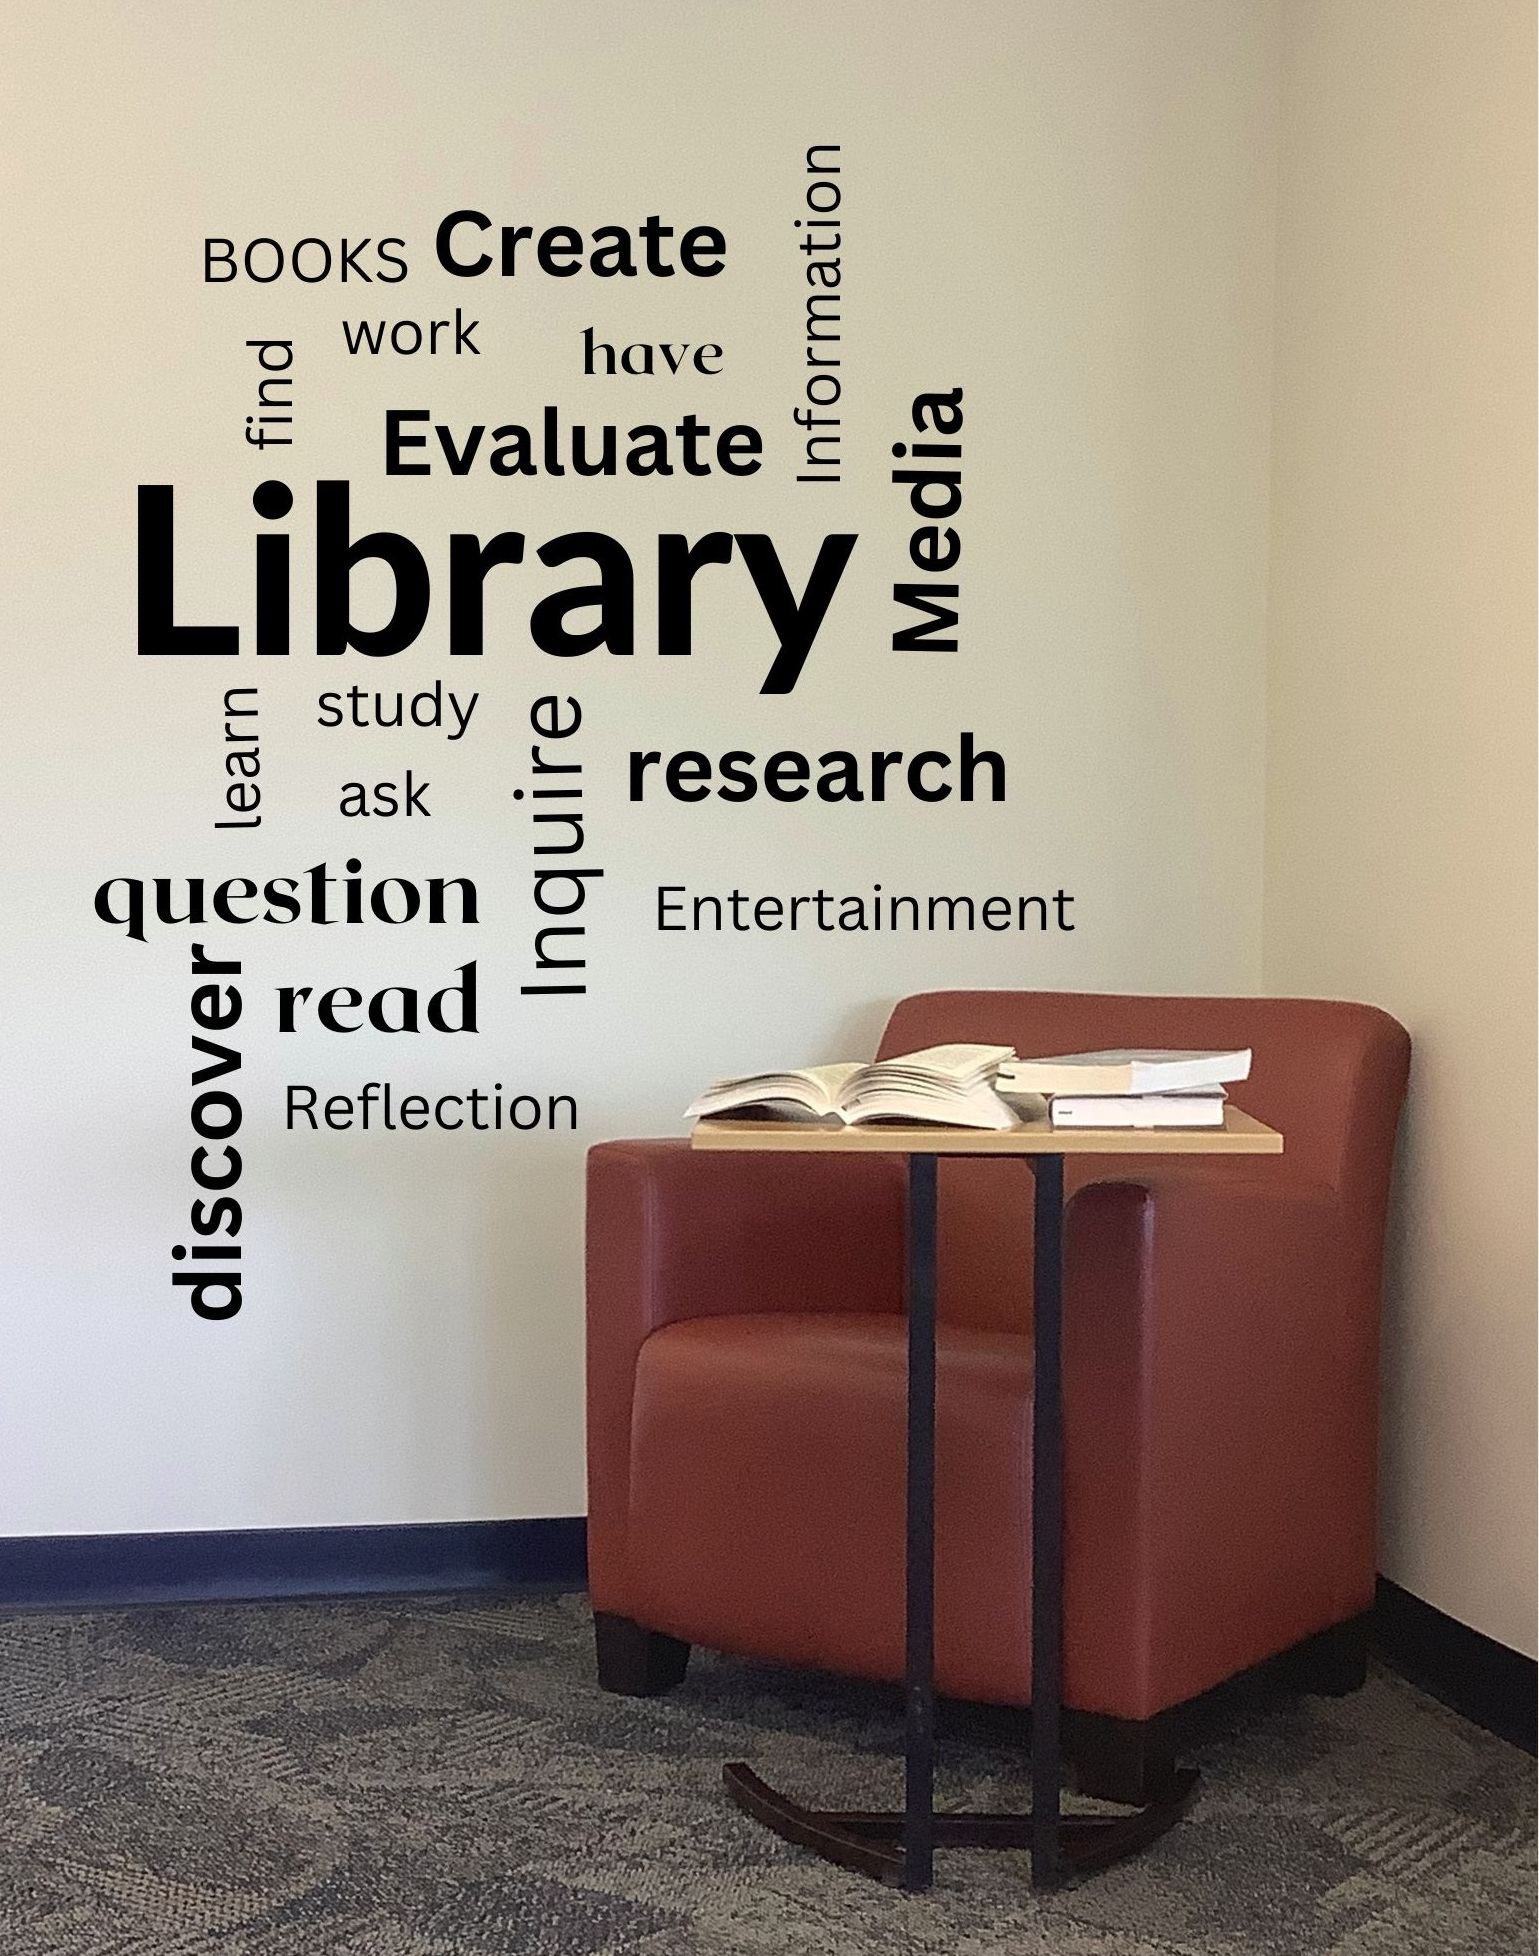 Chair and book with wordcloud about libraries on the wall